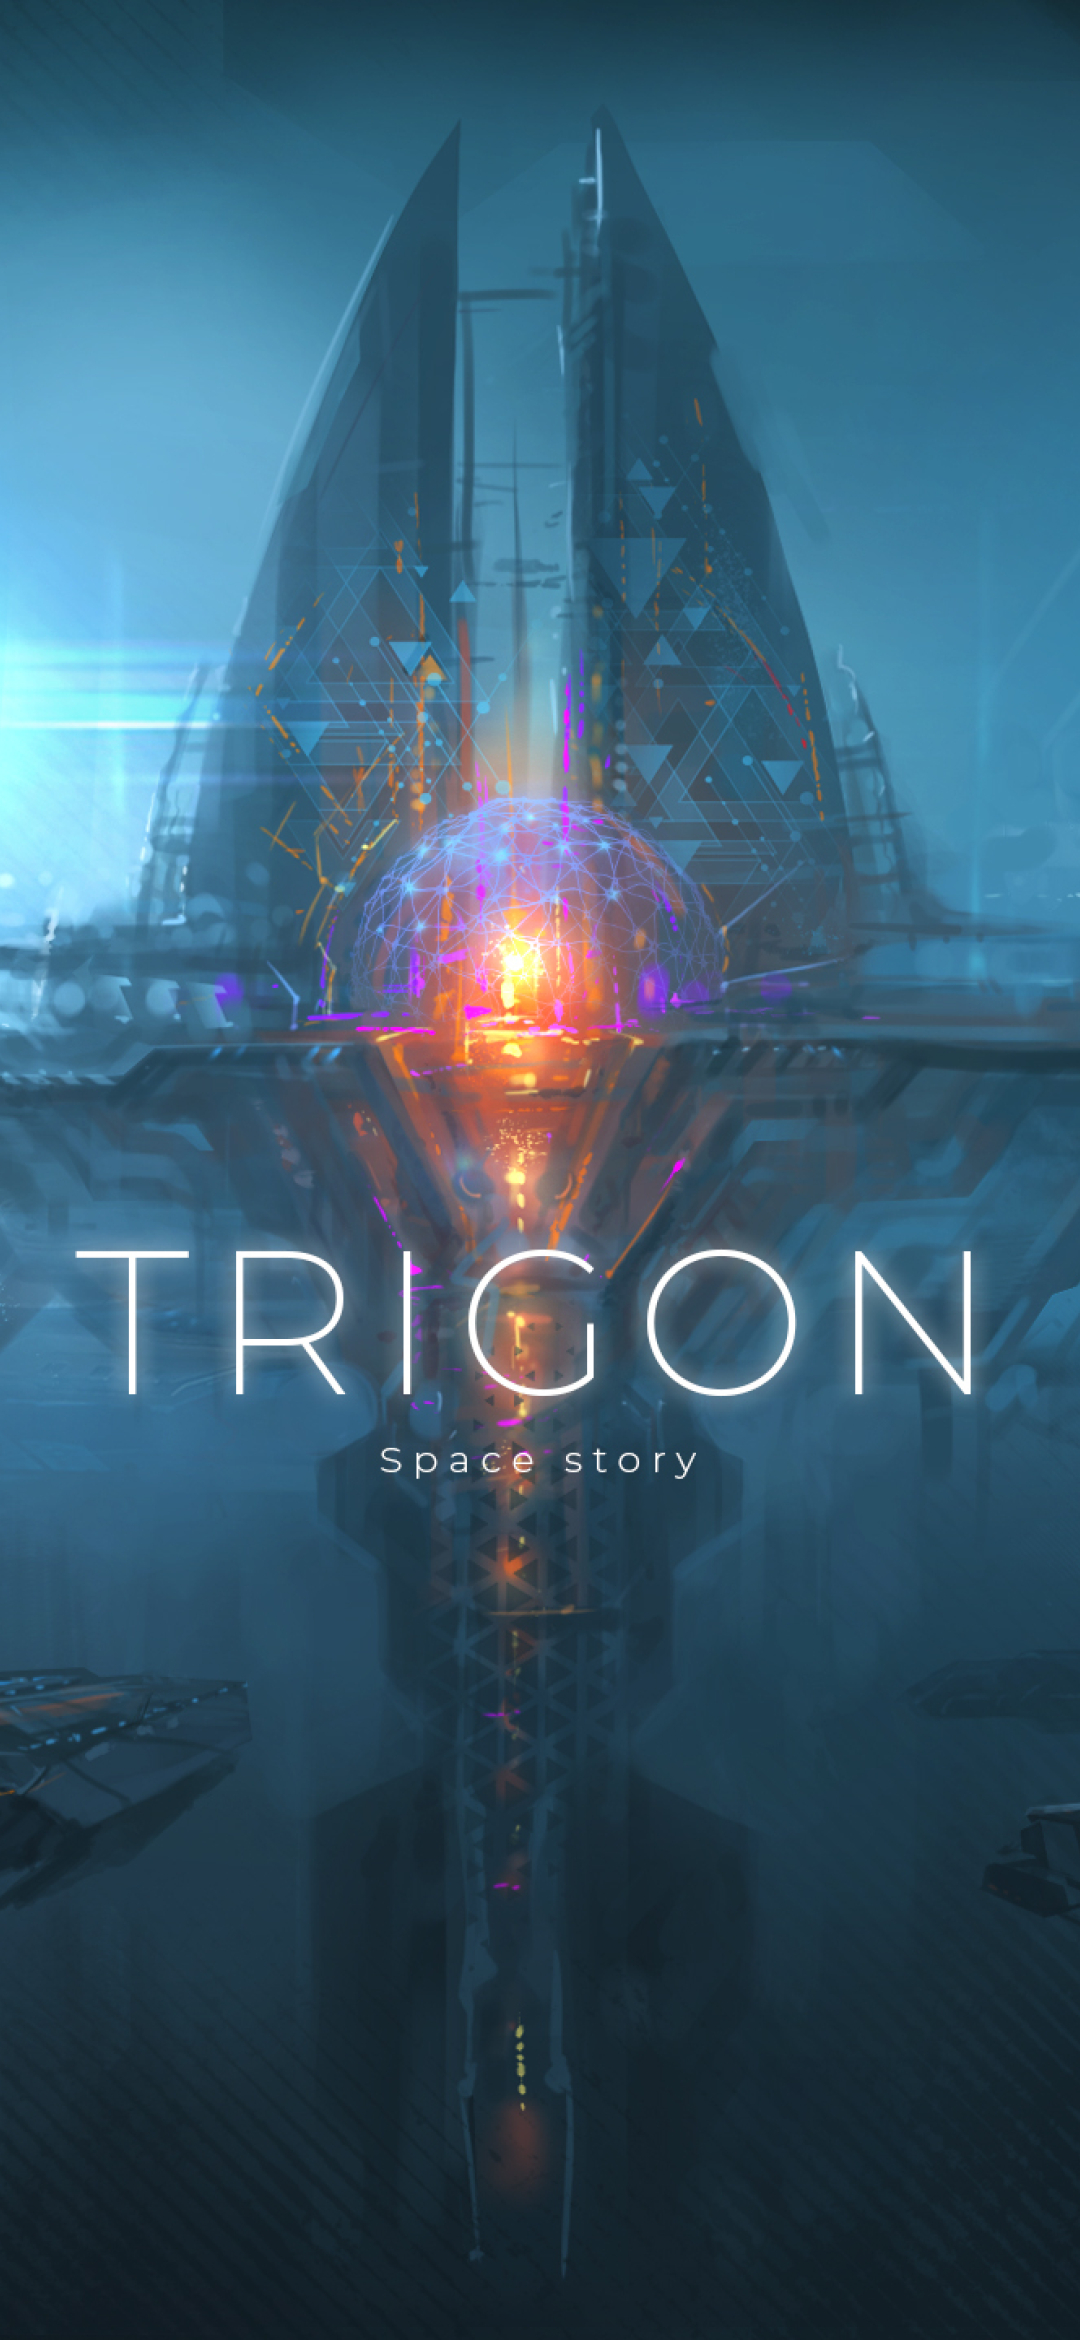 Trigon: Space Story download the last version for ipod